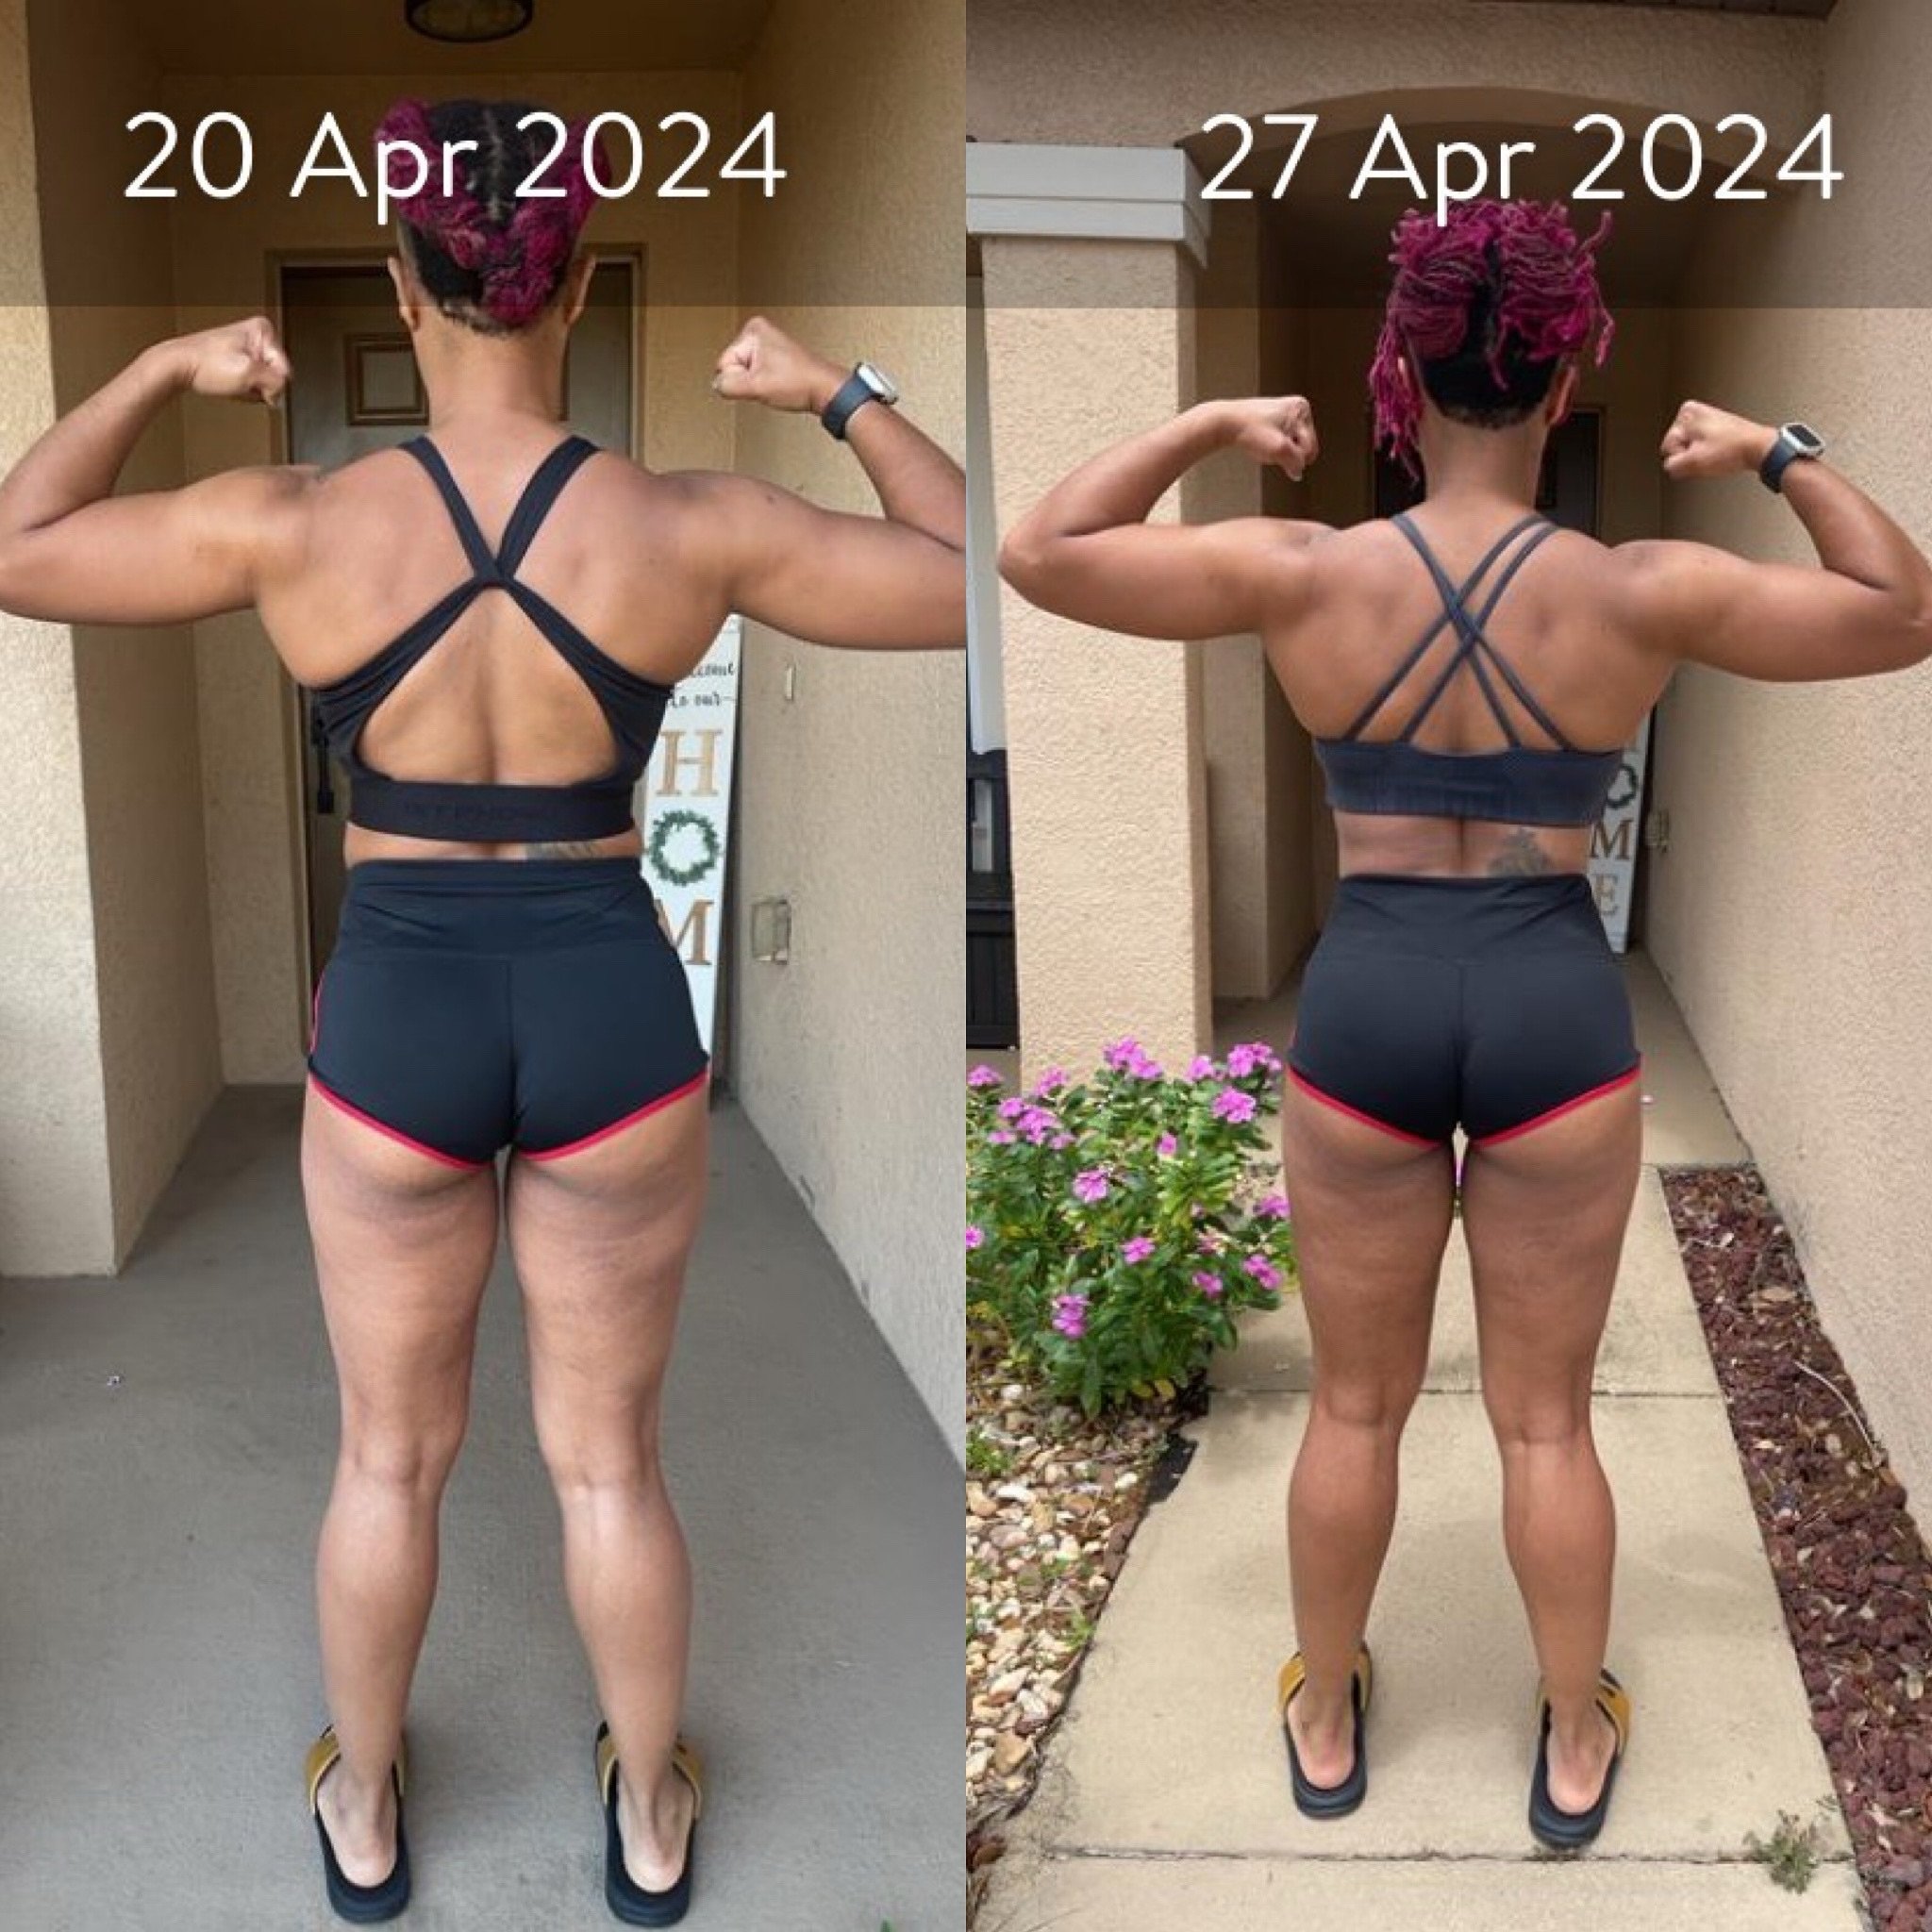 I&rsquo;ve been putting in the work to enhance my back strength 💪🏽, and I&rsquo;m thrilled with the progress! Here&rsquo;s a one-week comparison, and I&rsquo;m loving the results. A strong and defined back is super important to me&mdash;excited to 